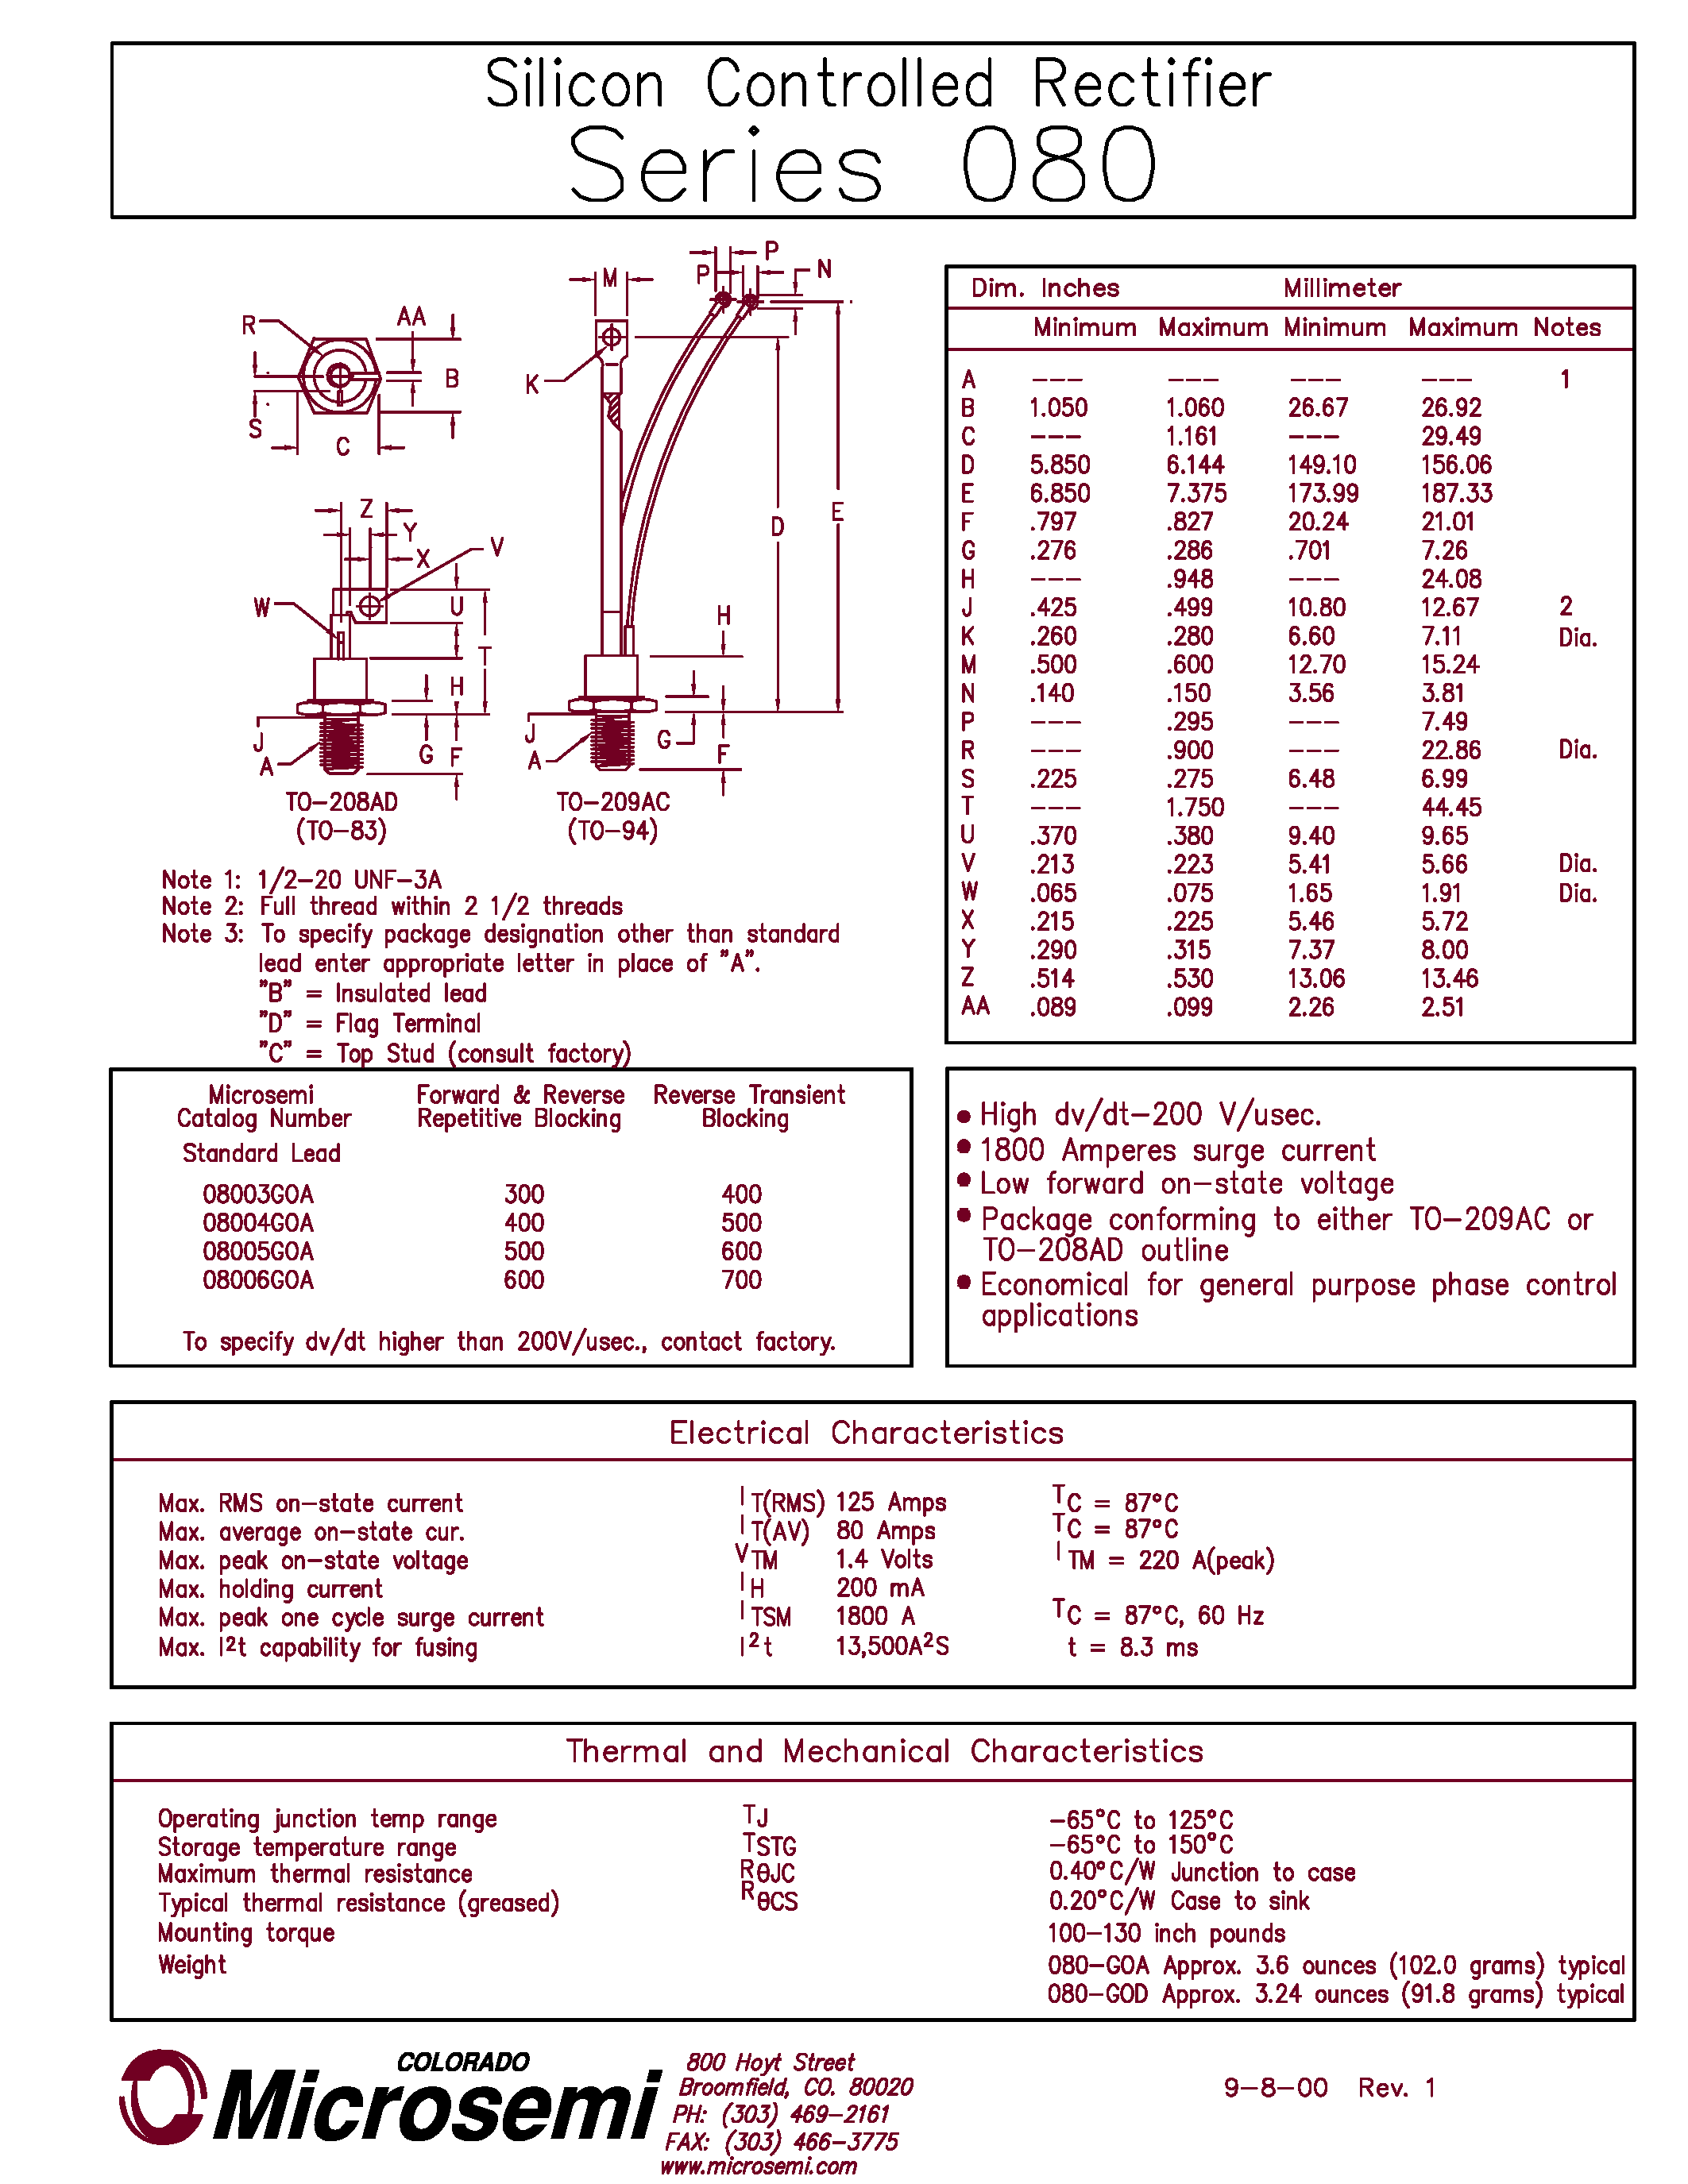 Datasheet 08005GOB - Silicon Controlled Rectifier page 1